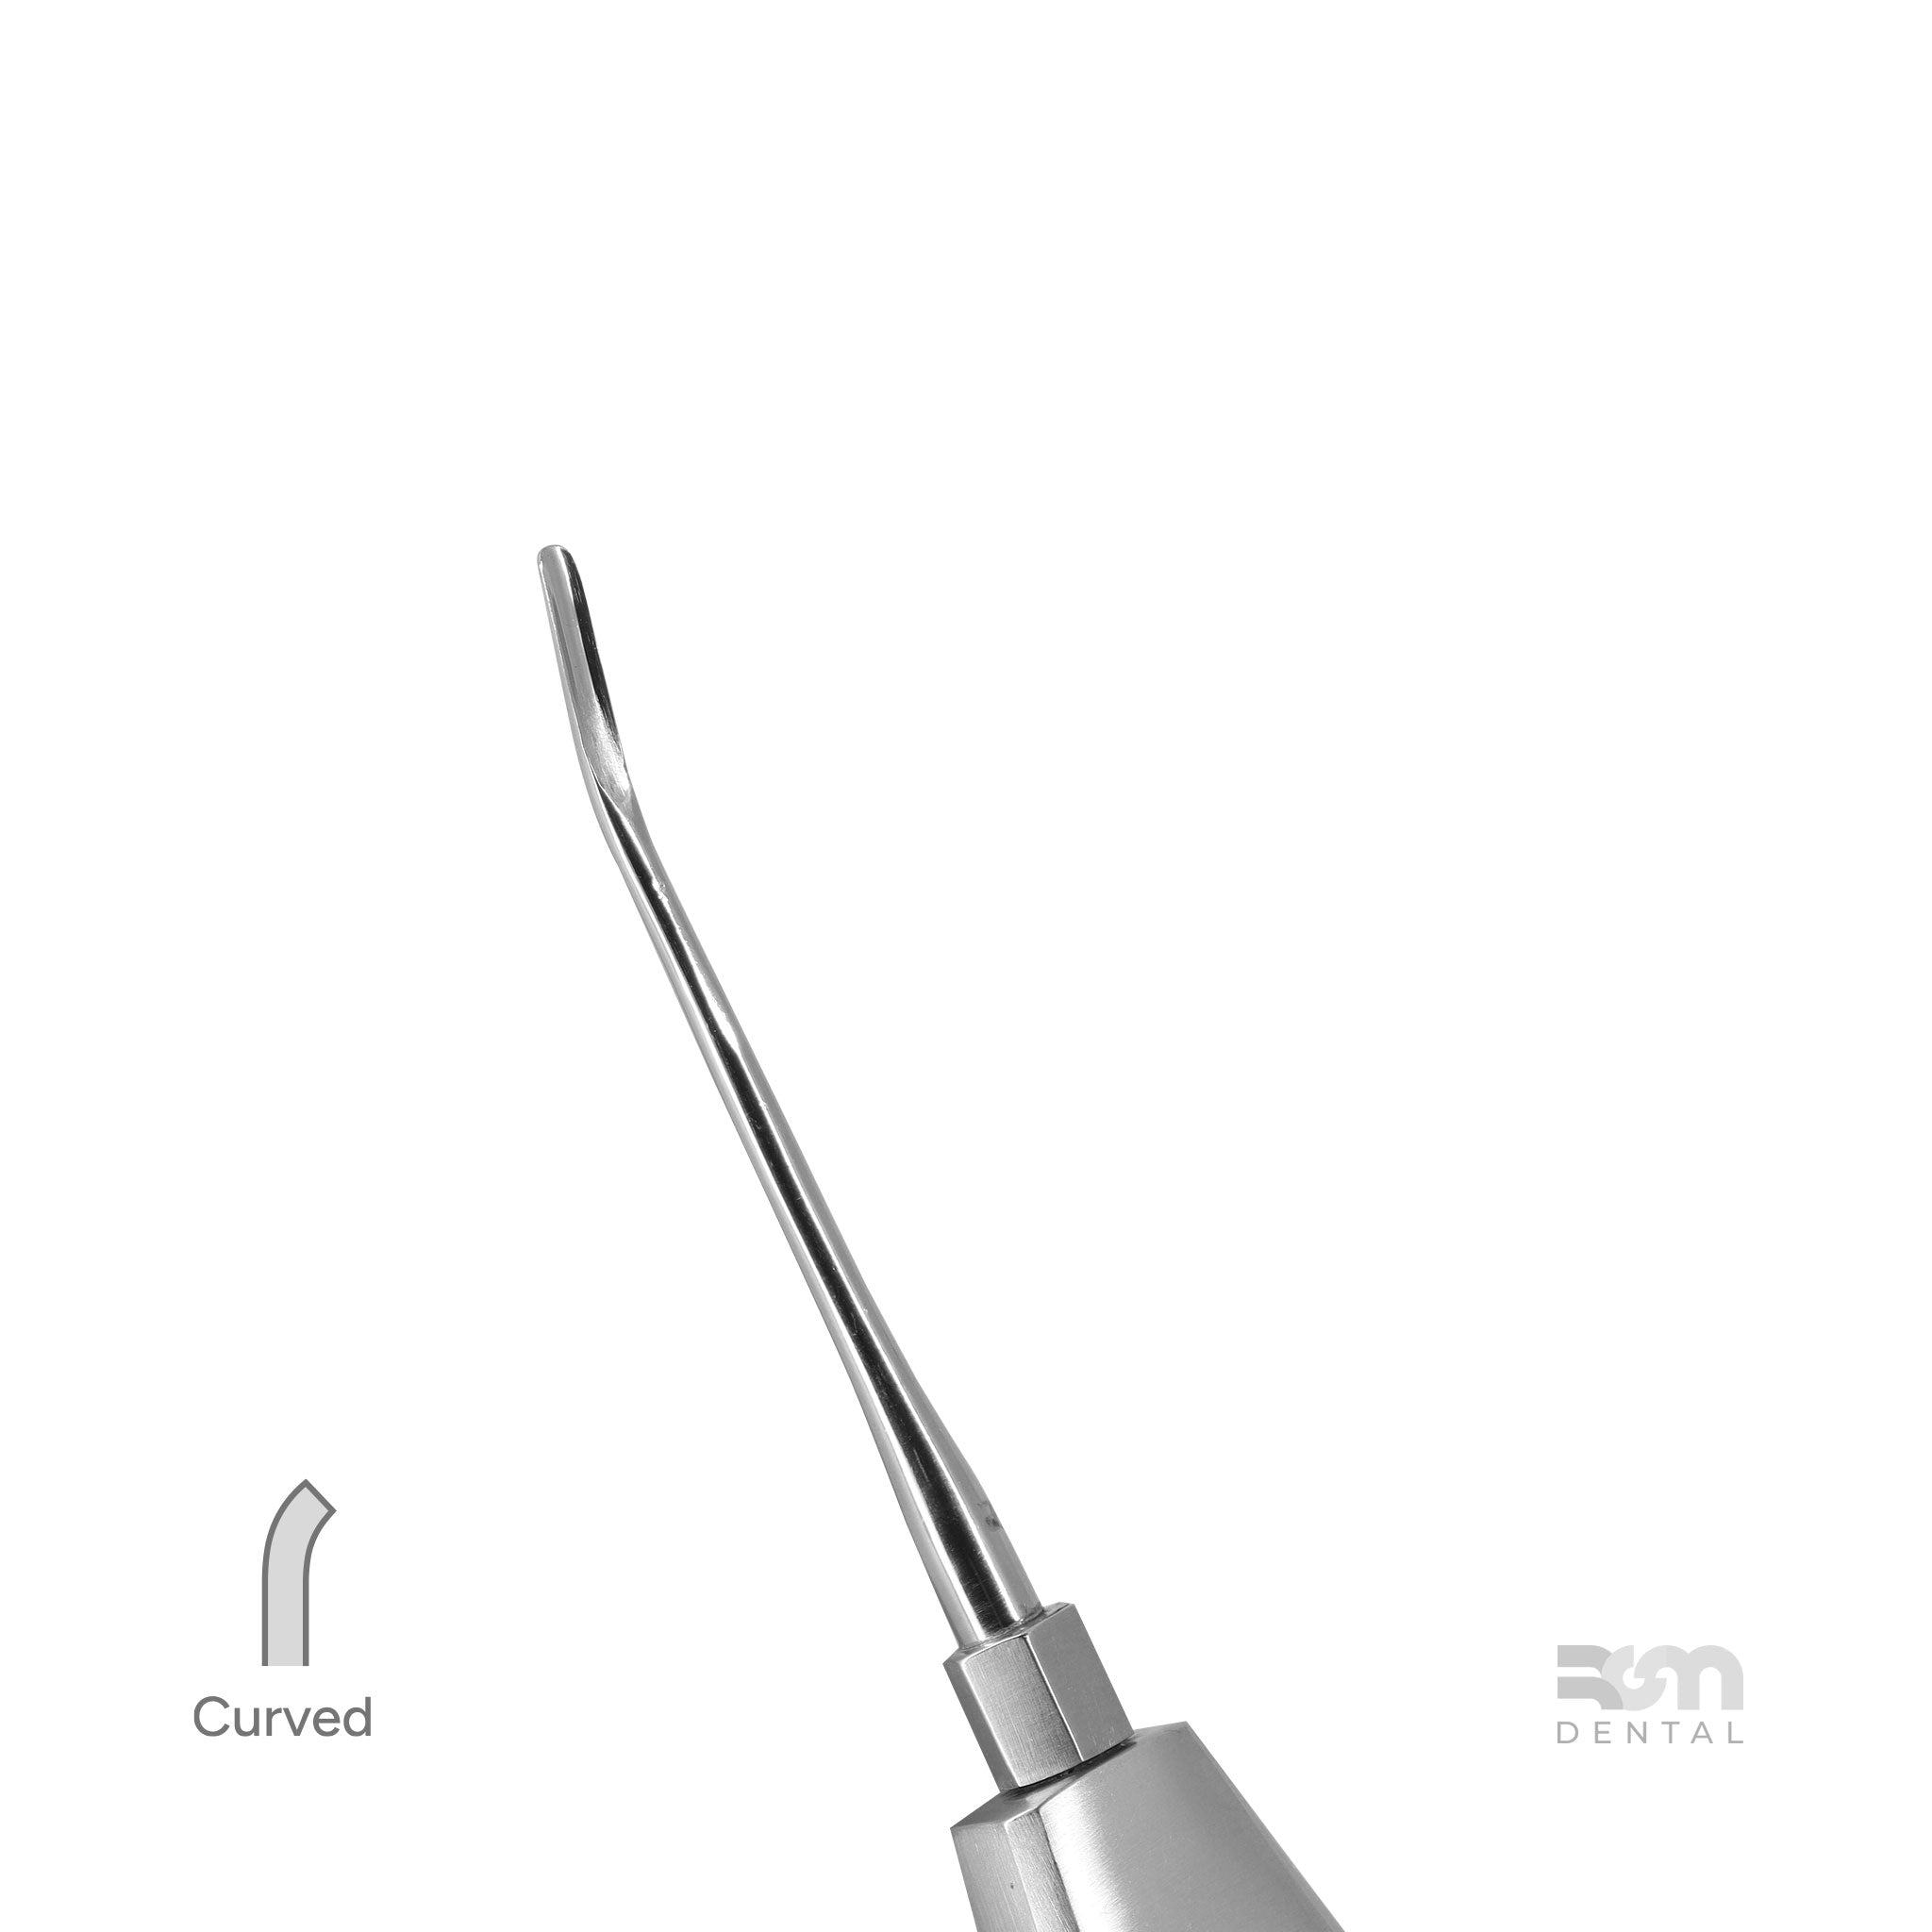 Luxator LUX-05 : Curved 3.0mm